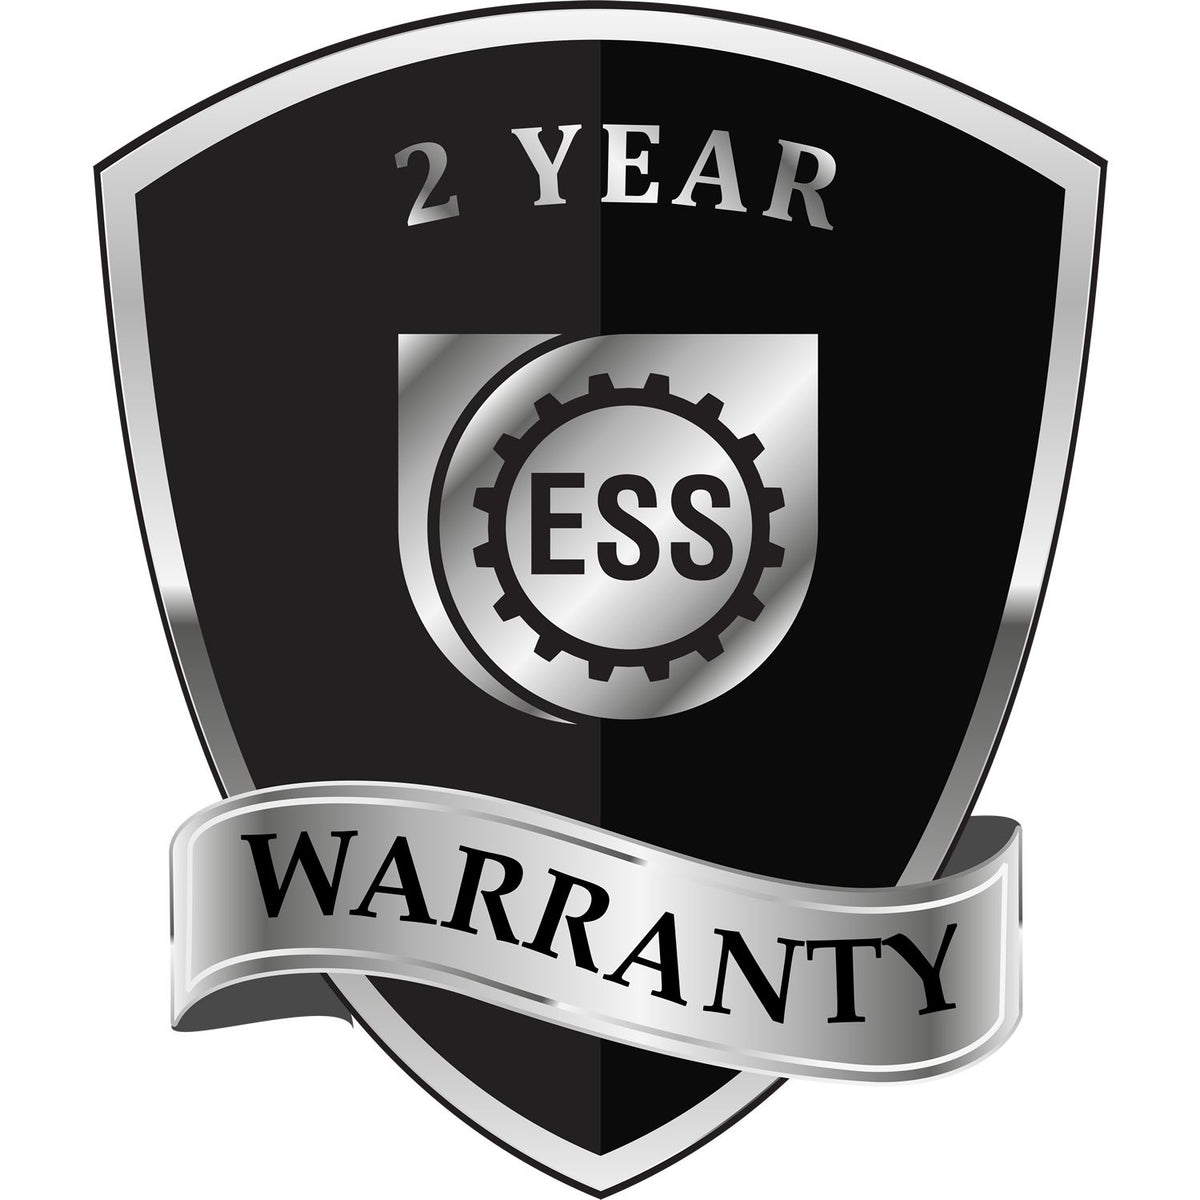 A badge or emblem showing a warranty icon for the Heavy Duty Cast Iron Texas Architect Embosser